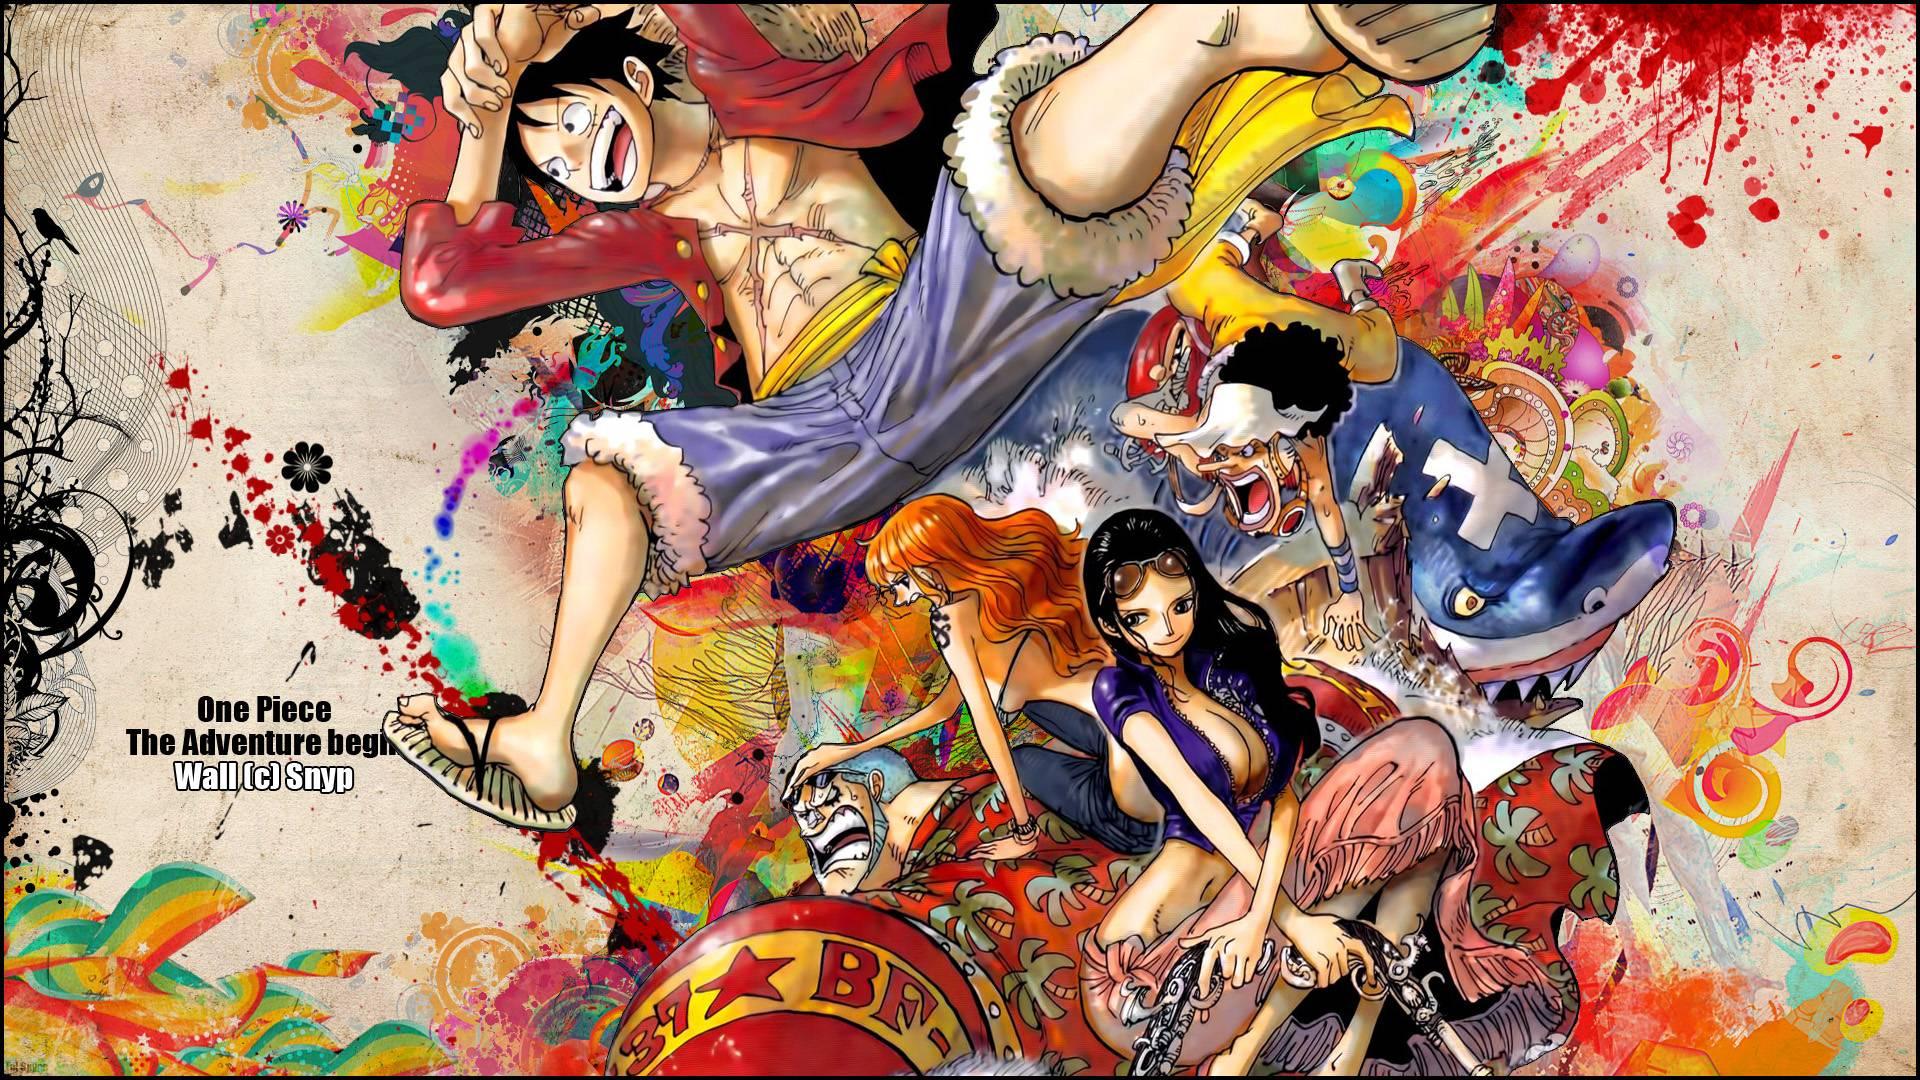 1920 x 1080 · jpeg - One Piece Wallpapers - Wallpaper Cave